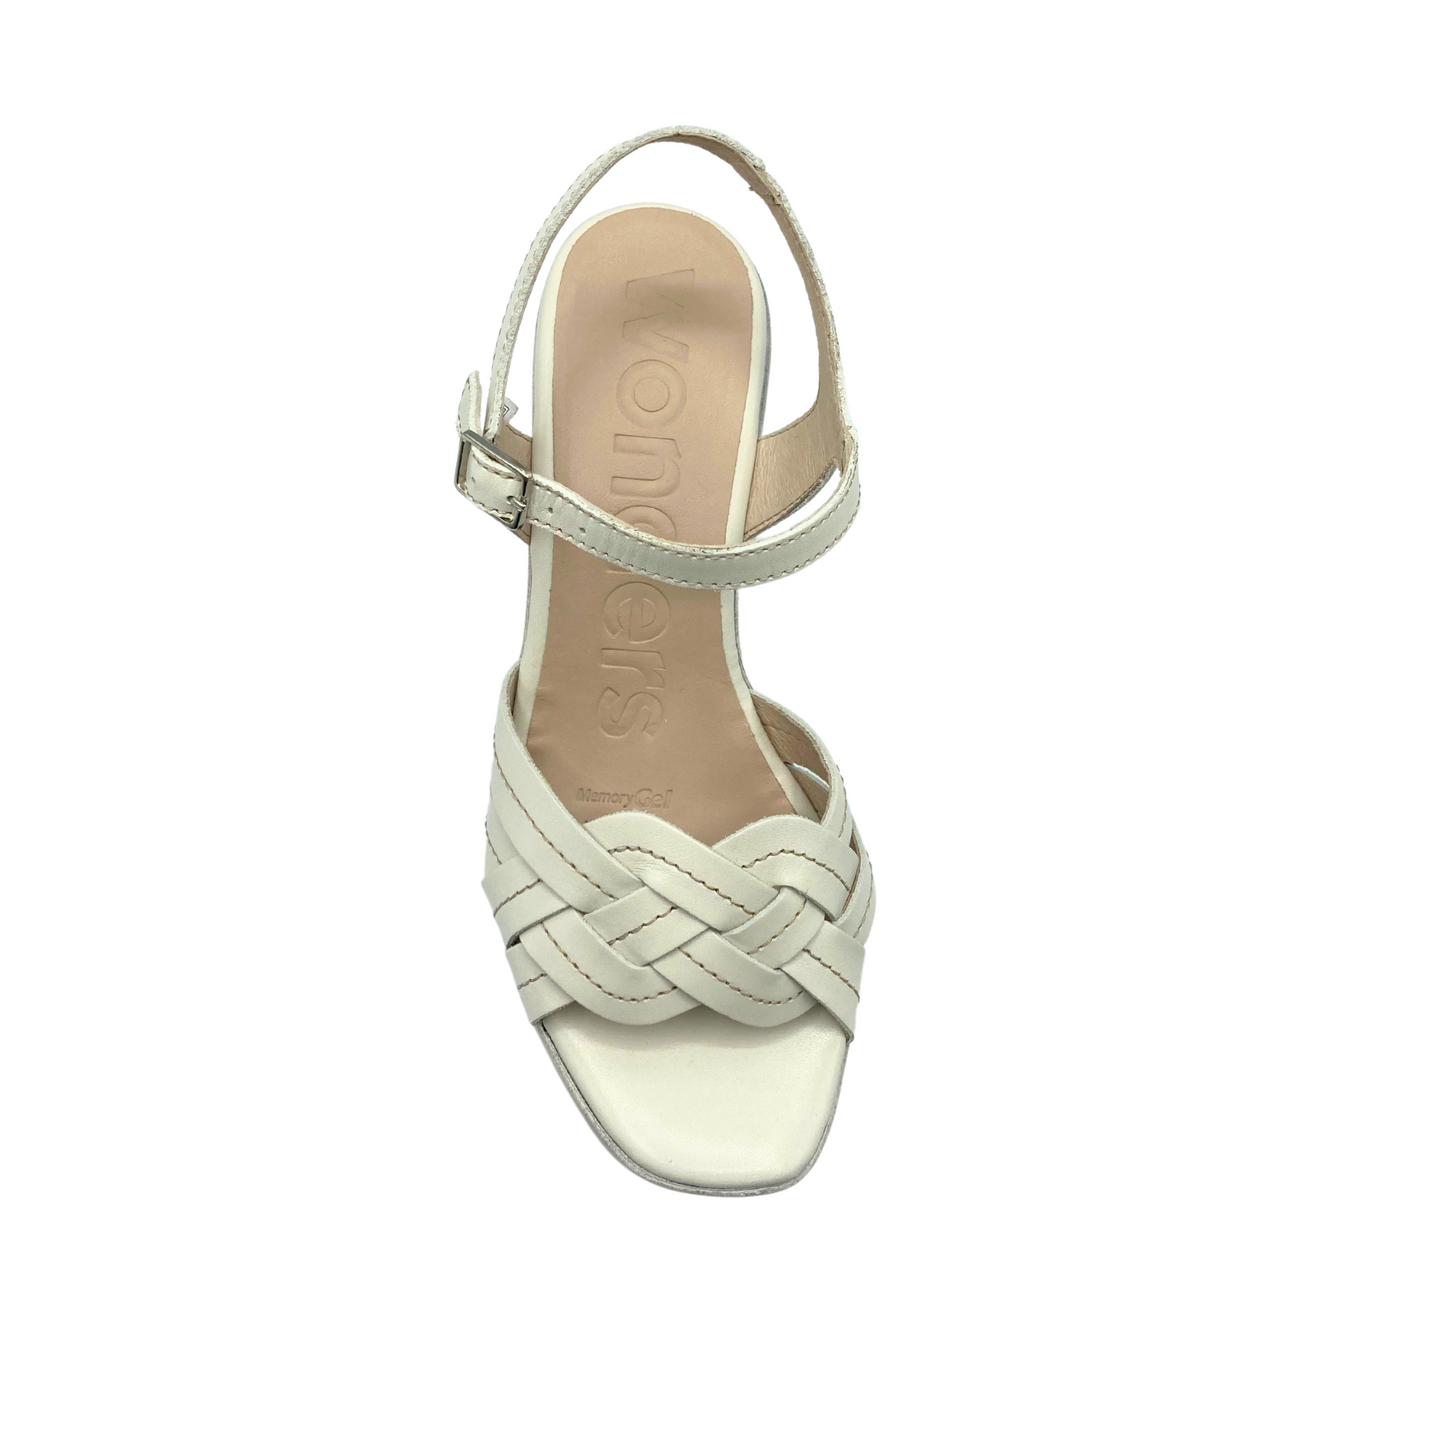 Top down view of a creamy white leather sandal.  Woven pattern at forefoot with a heel and ankle strap